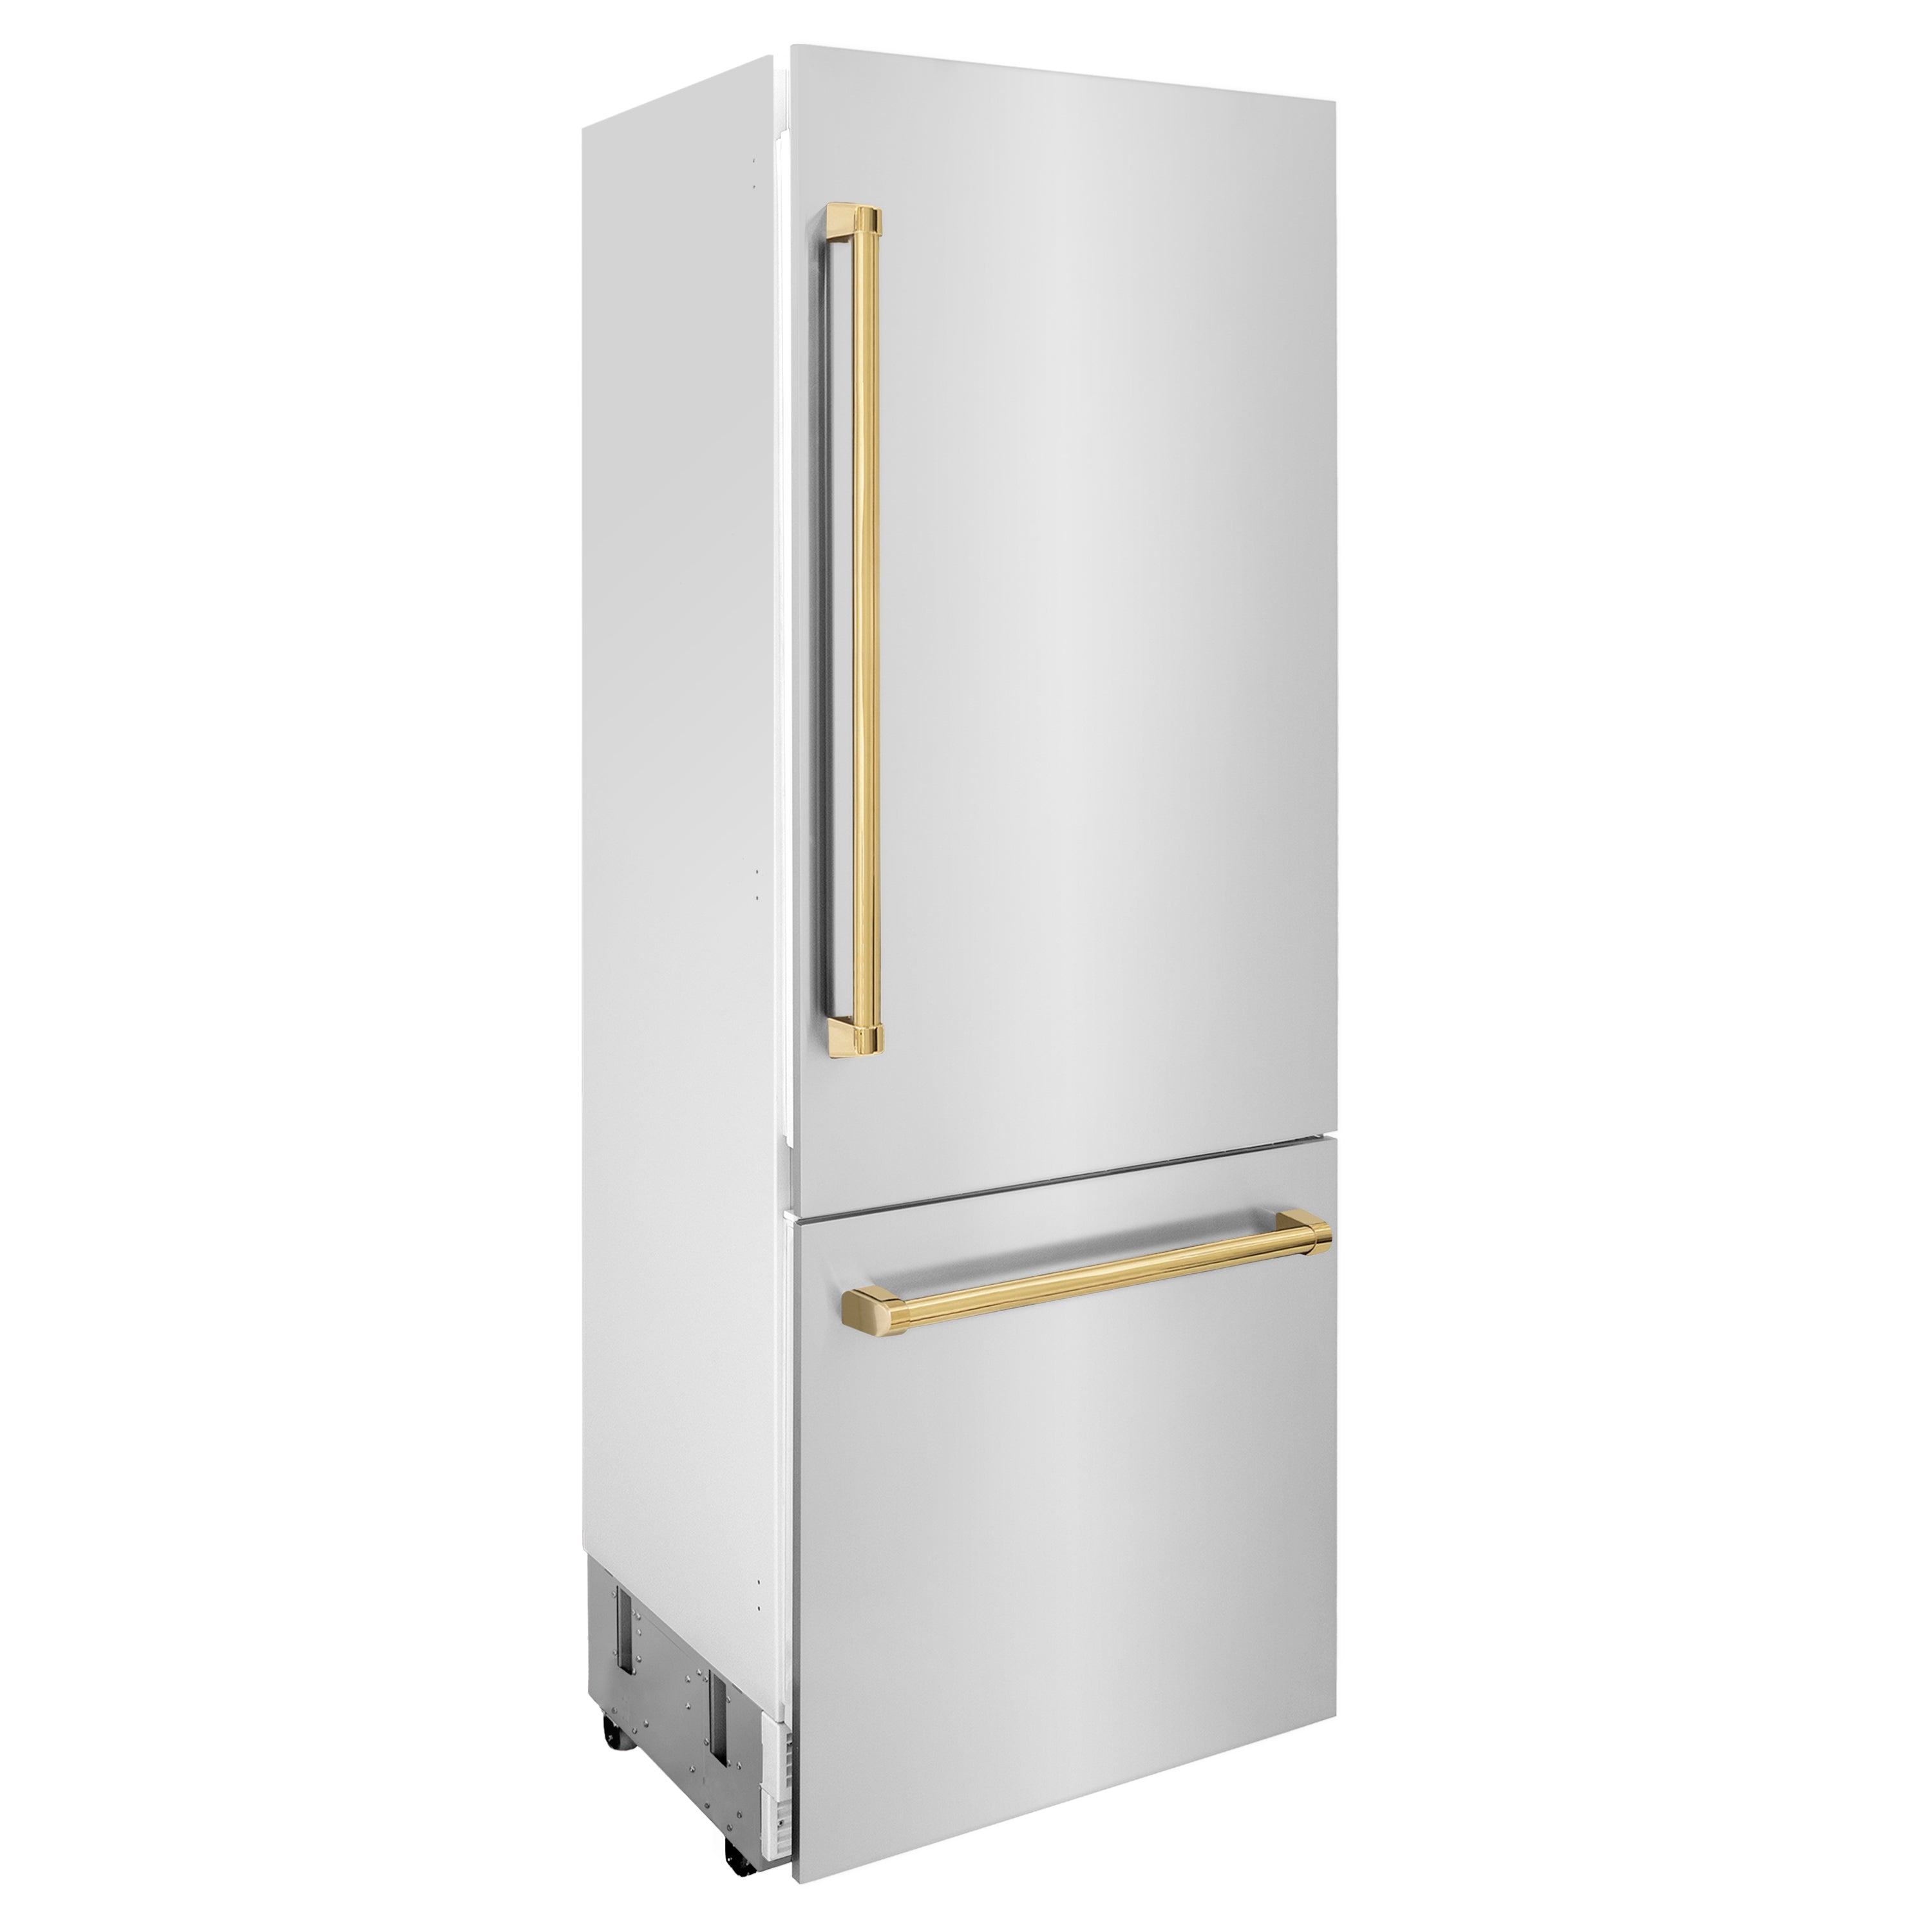 ZLINE 30” Autograph Edition 16.1 cu. ft. Built-in 2-Door Bottom Freezer Refrigerator with Internal Water and Ice Dispenser in Stainless Steel with Polished Gold Accents